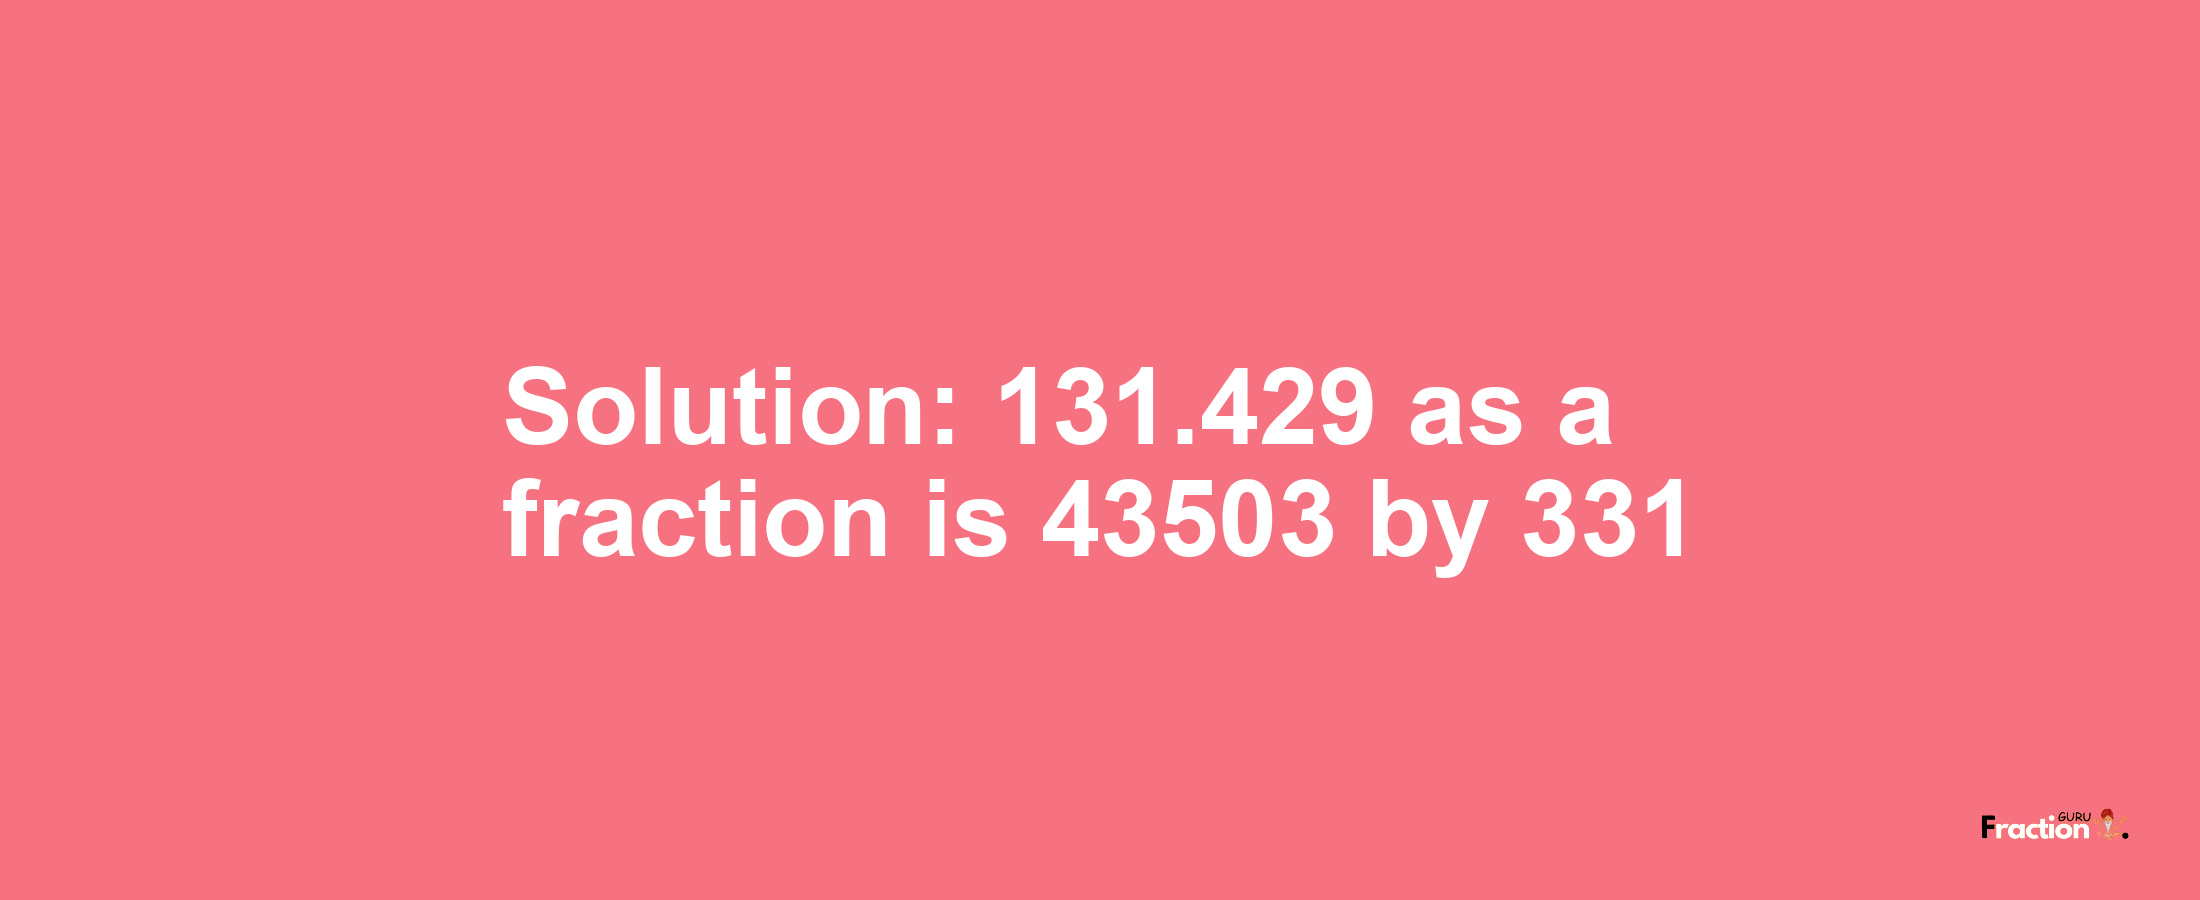 Solution:131.429 as a fraction is 43503/331